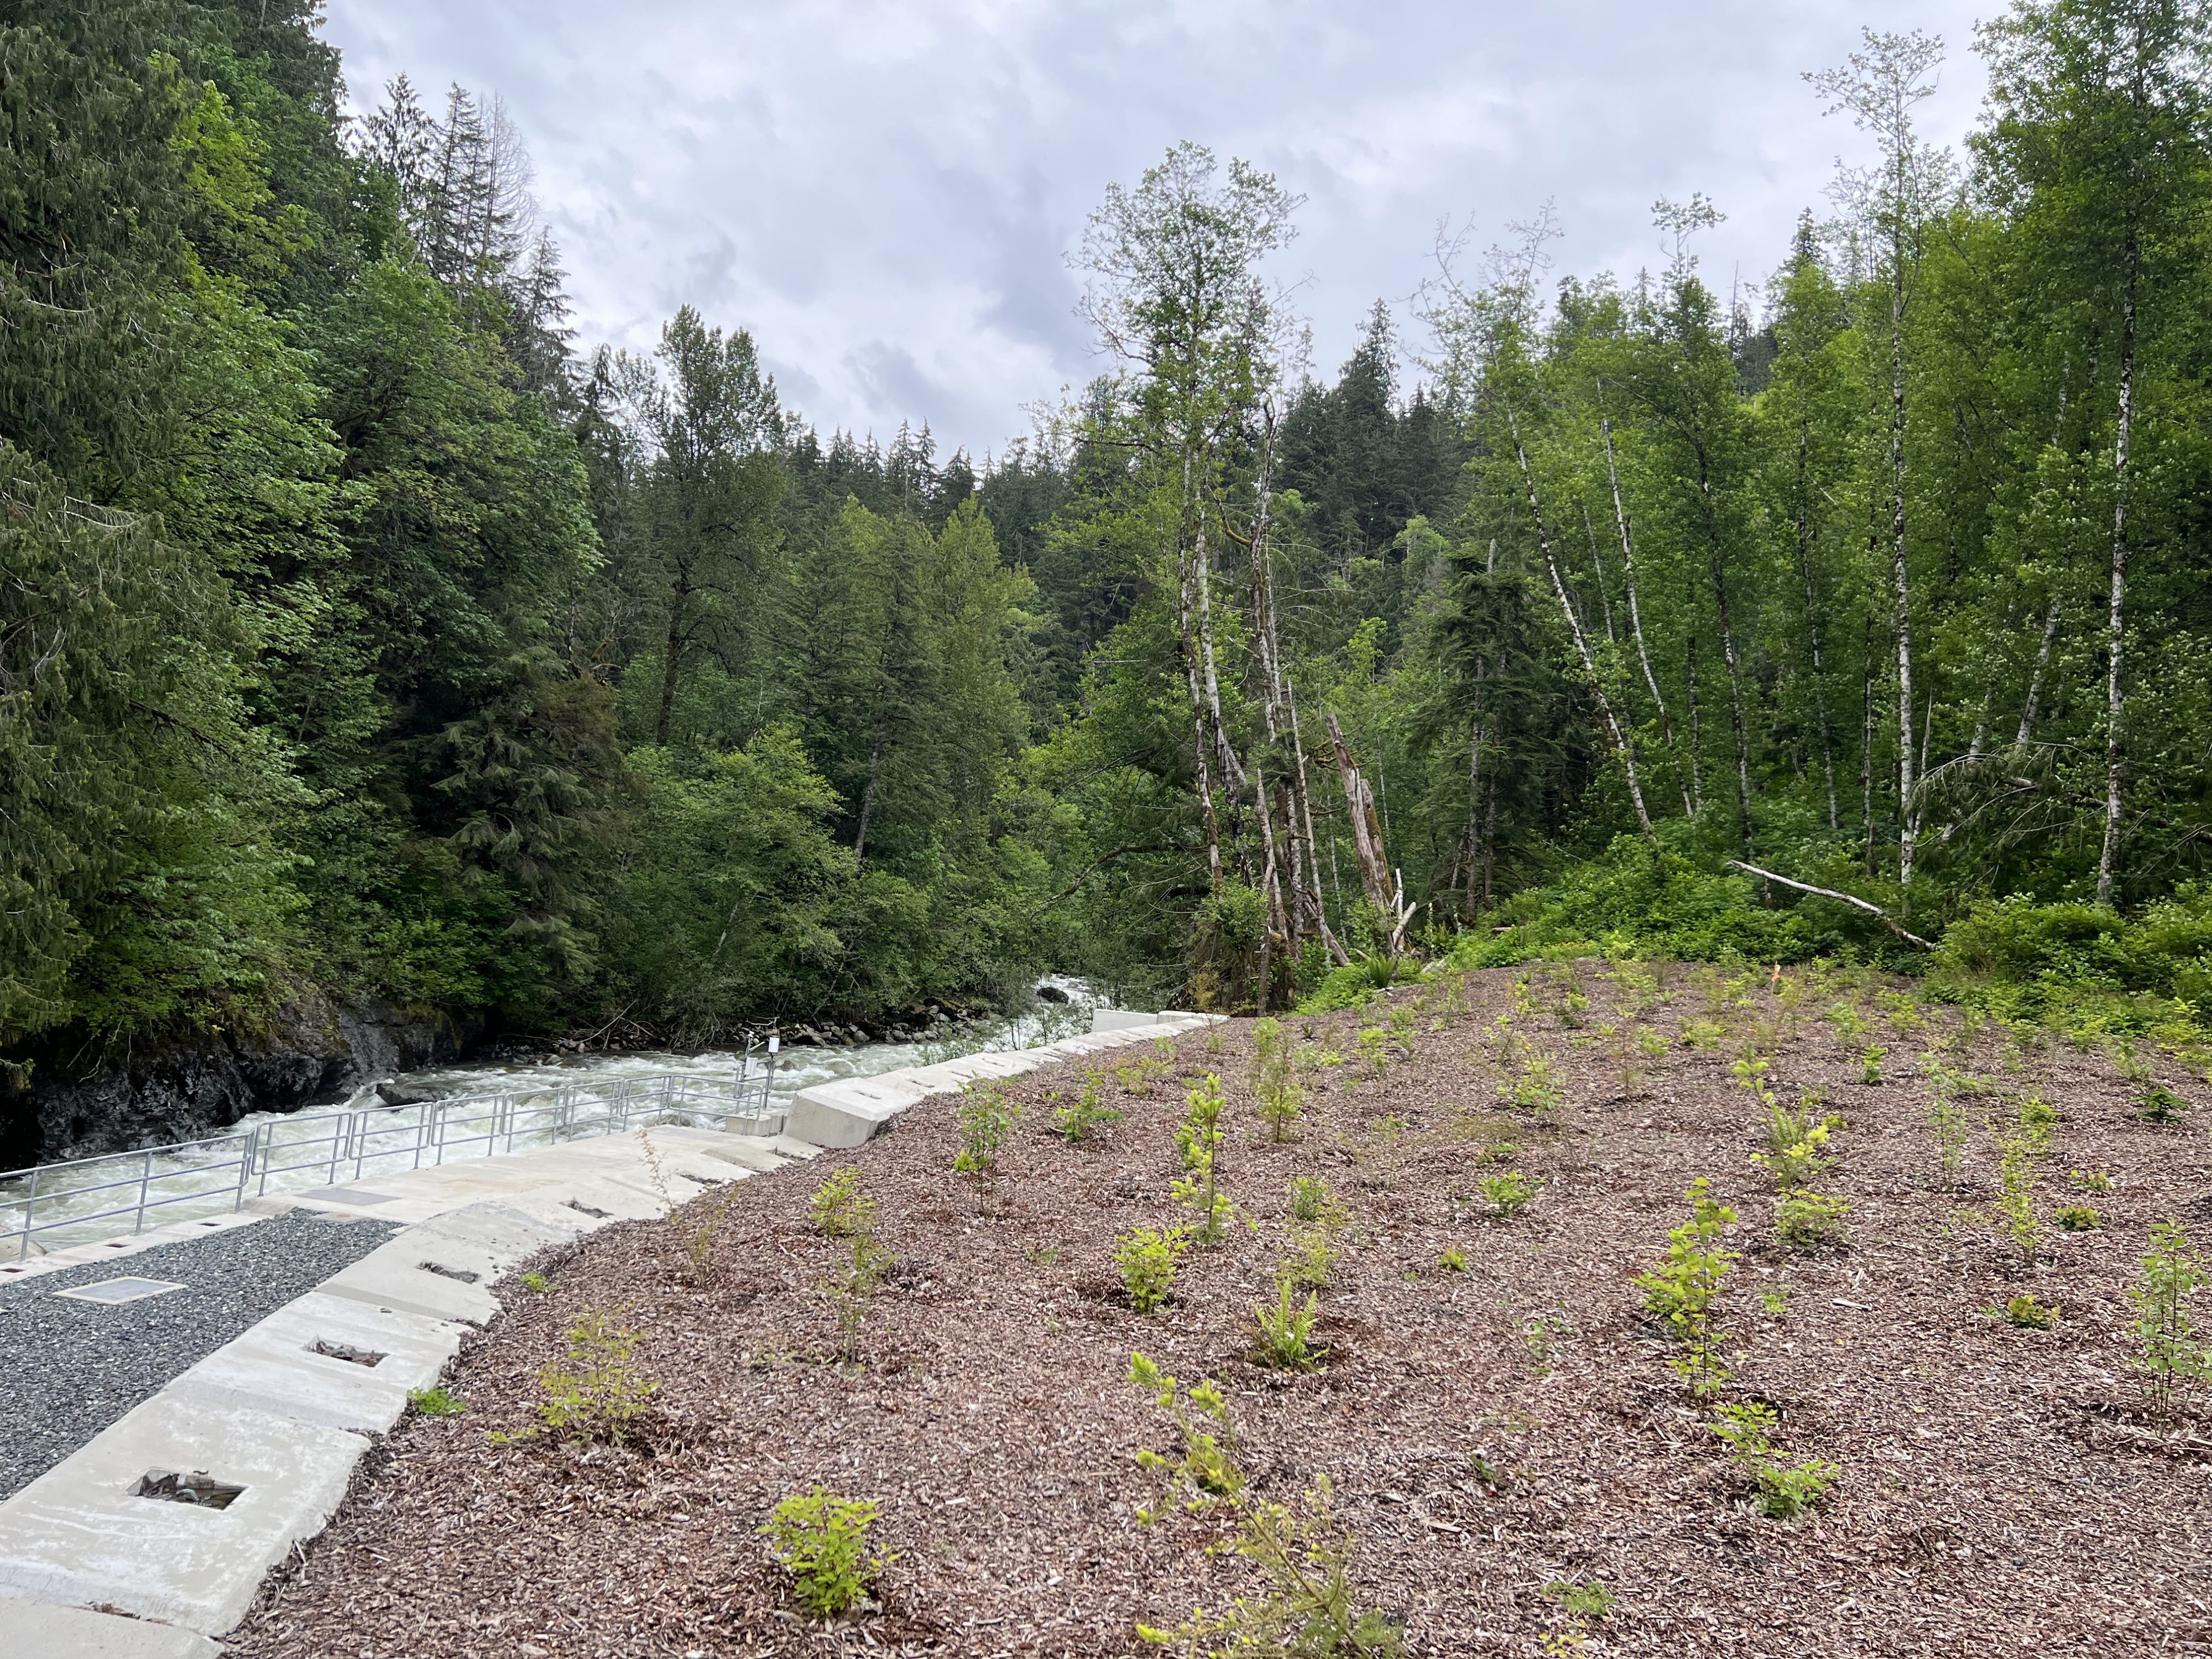 Newly planted plants cover ground in foreground. River and forest in background.